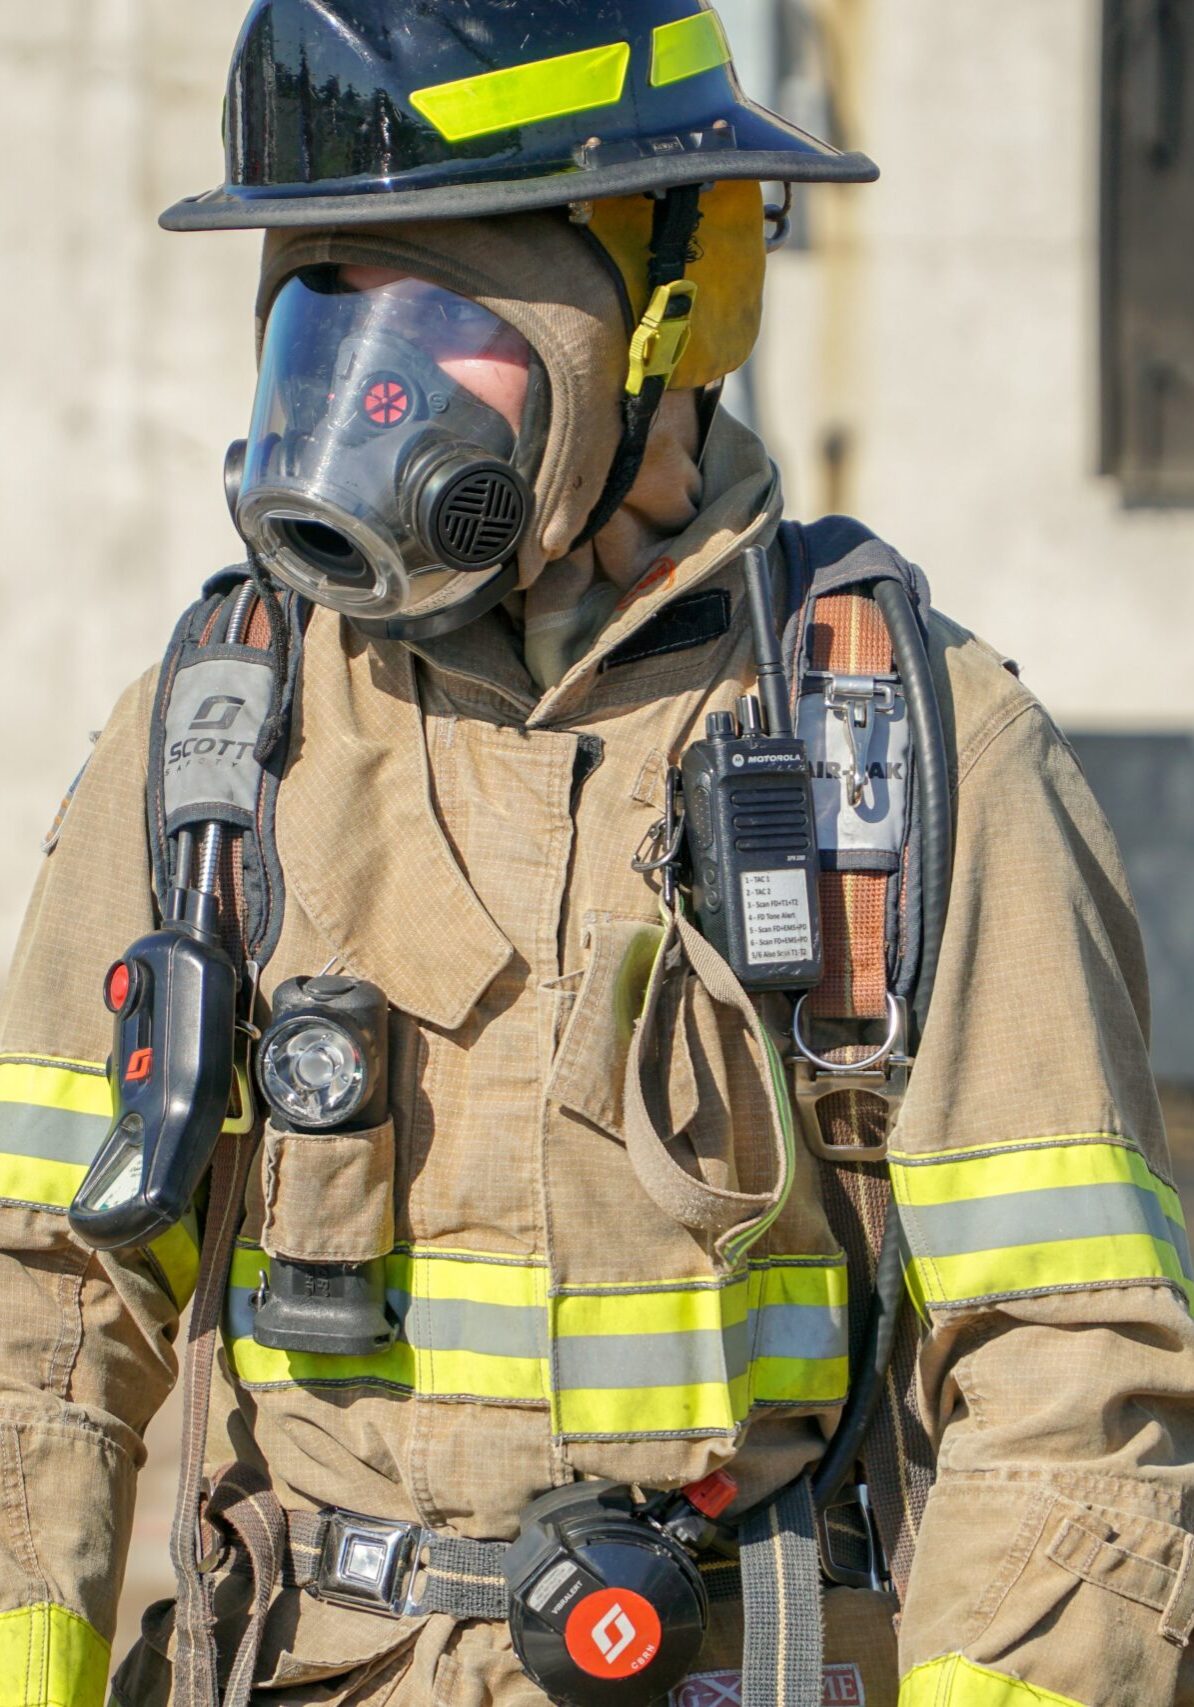 NYC firefighter with mask on to protect against toxic fumes